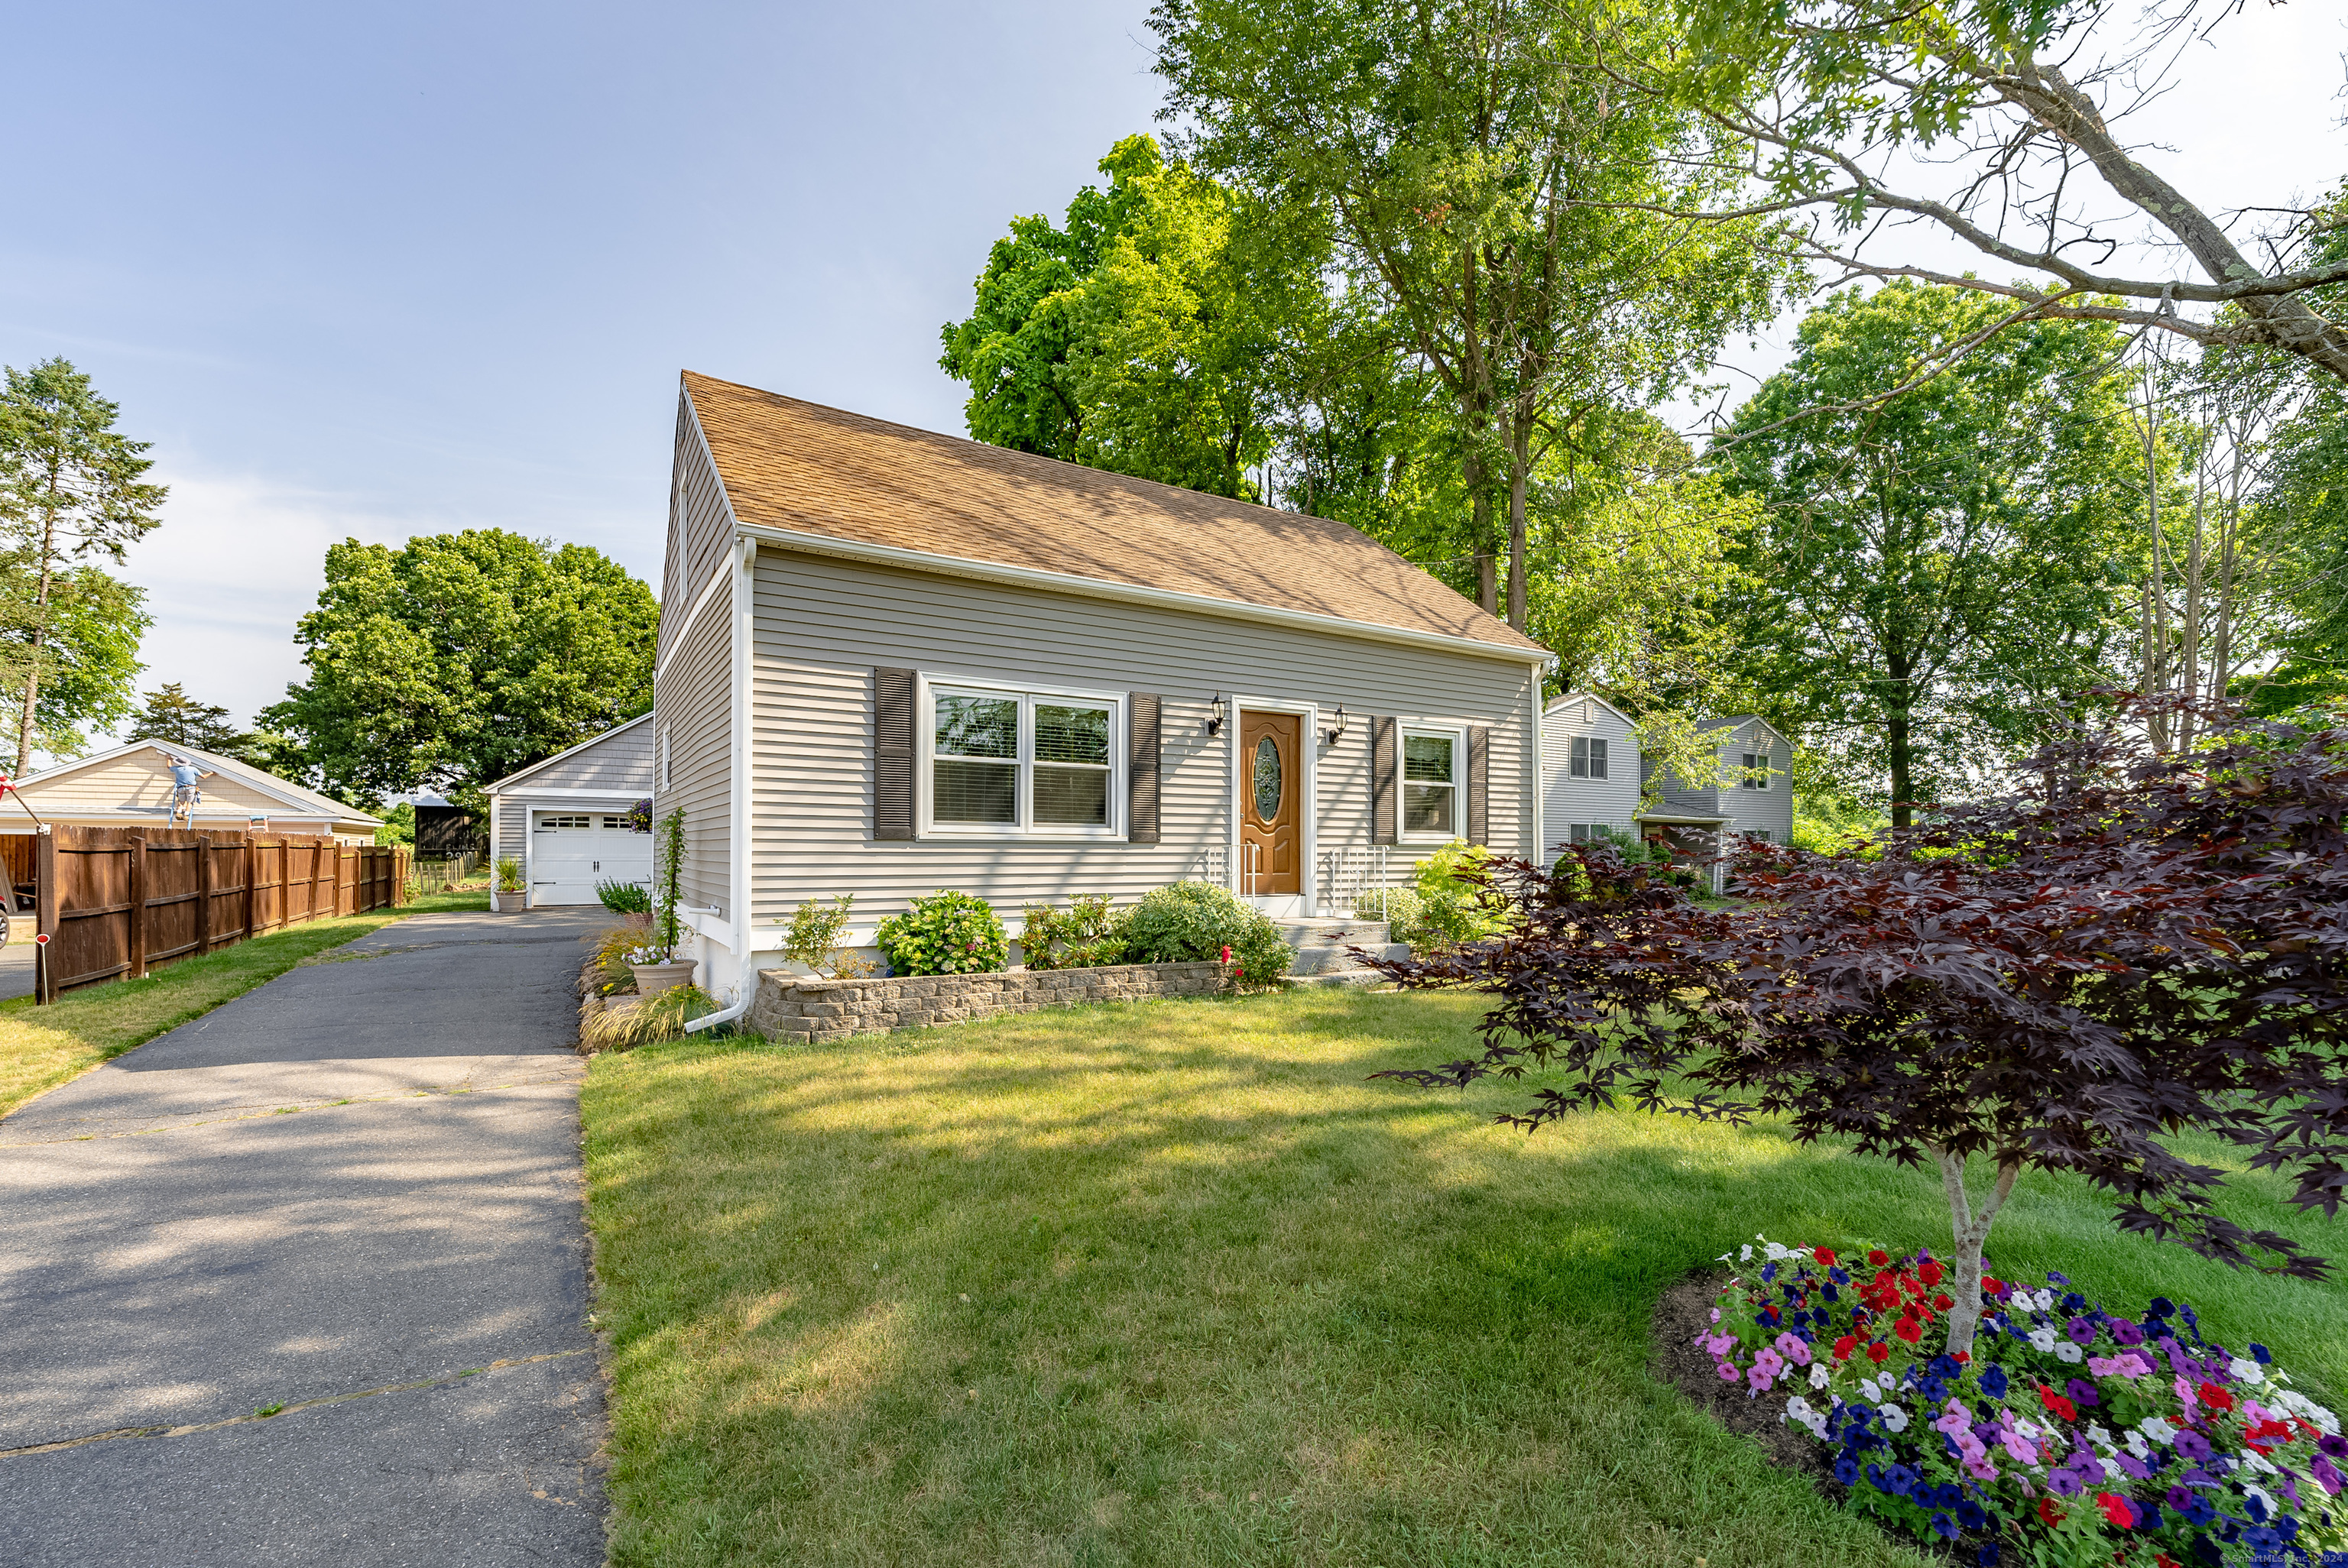 Property for Sale at 31 Tromley Road, East Windsor, Connecticut - Bedrooms: 3 
Bathrooms: 1 
Rooms: 6  - $319,900